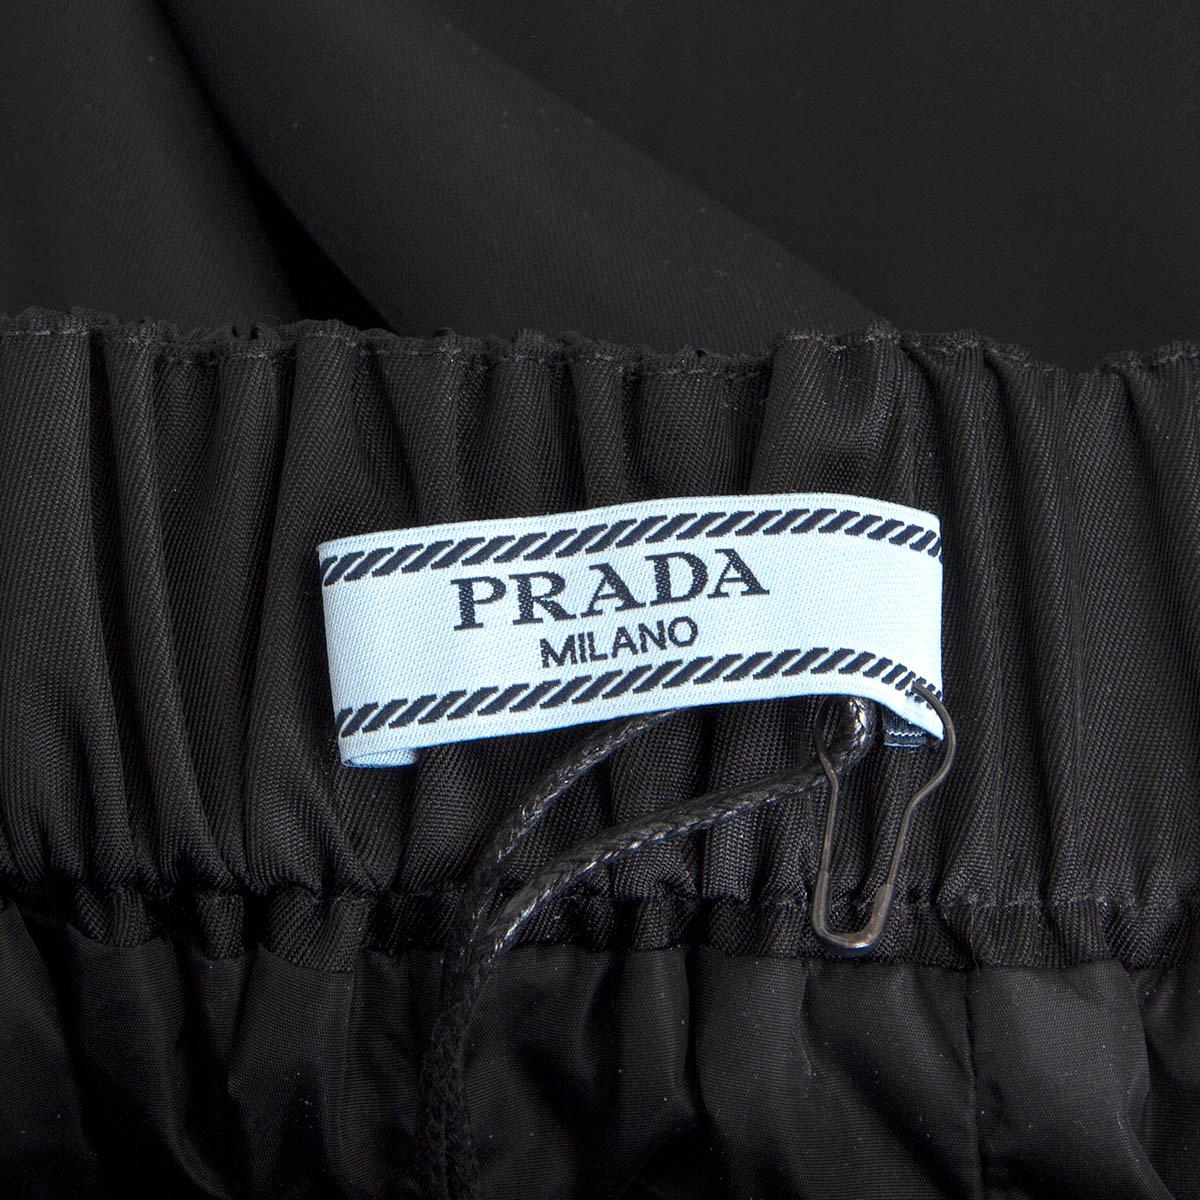 100% authentic Prada knee-length flared skirt in black nylon (100%) with elastic waistband and bow detail at front. The design comes with side pockets. Lined in black nylon (100%). Has been worn and is in excellent condition. 

Measurements
Tag